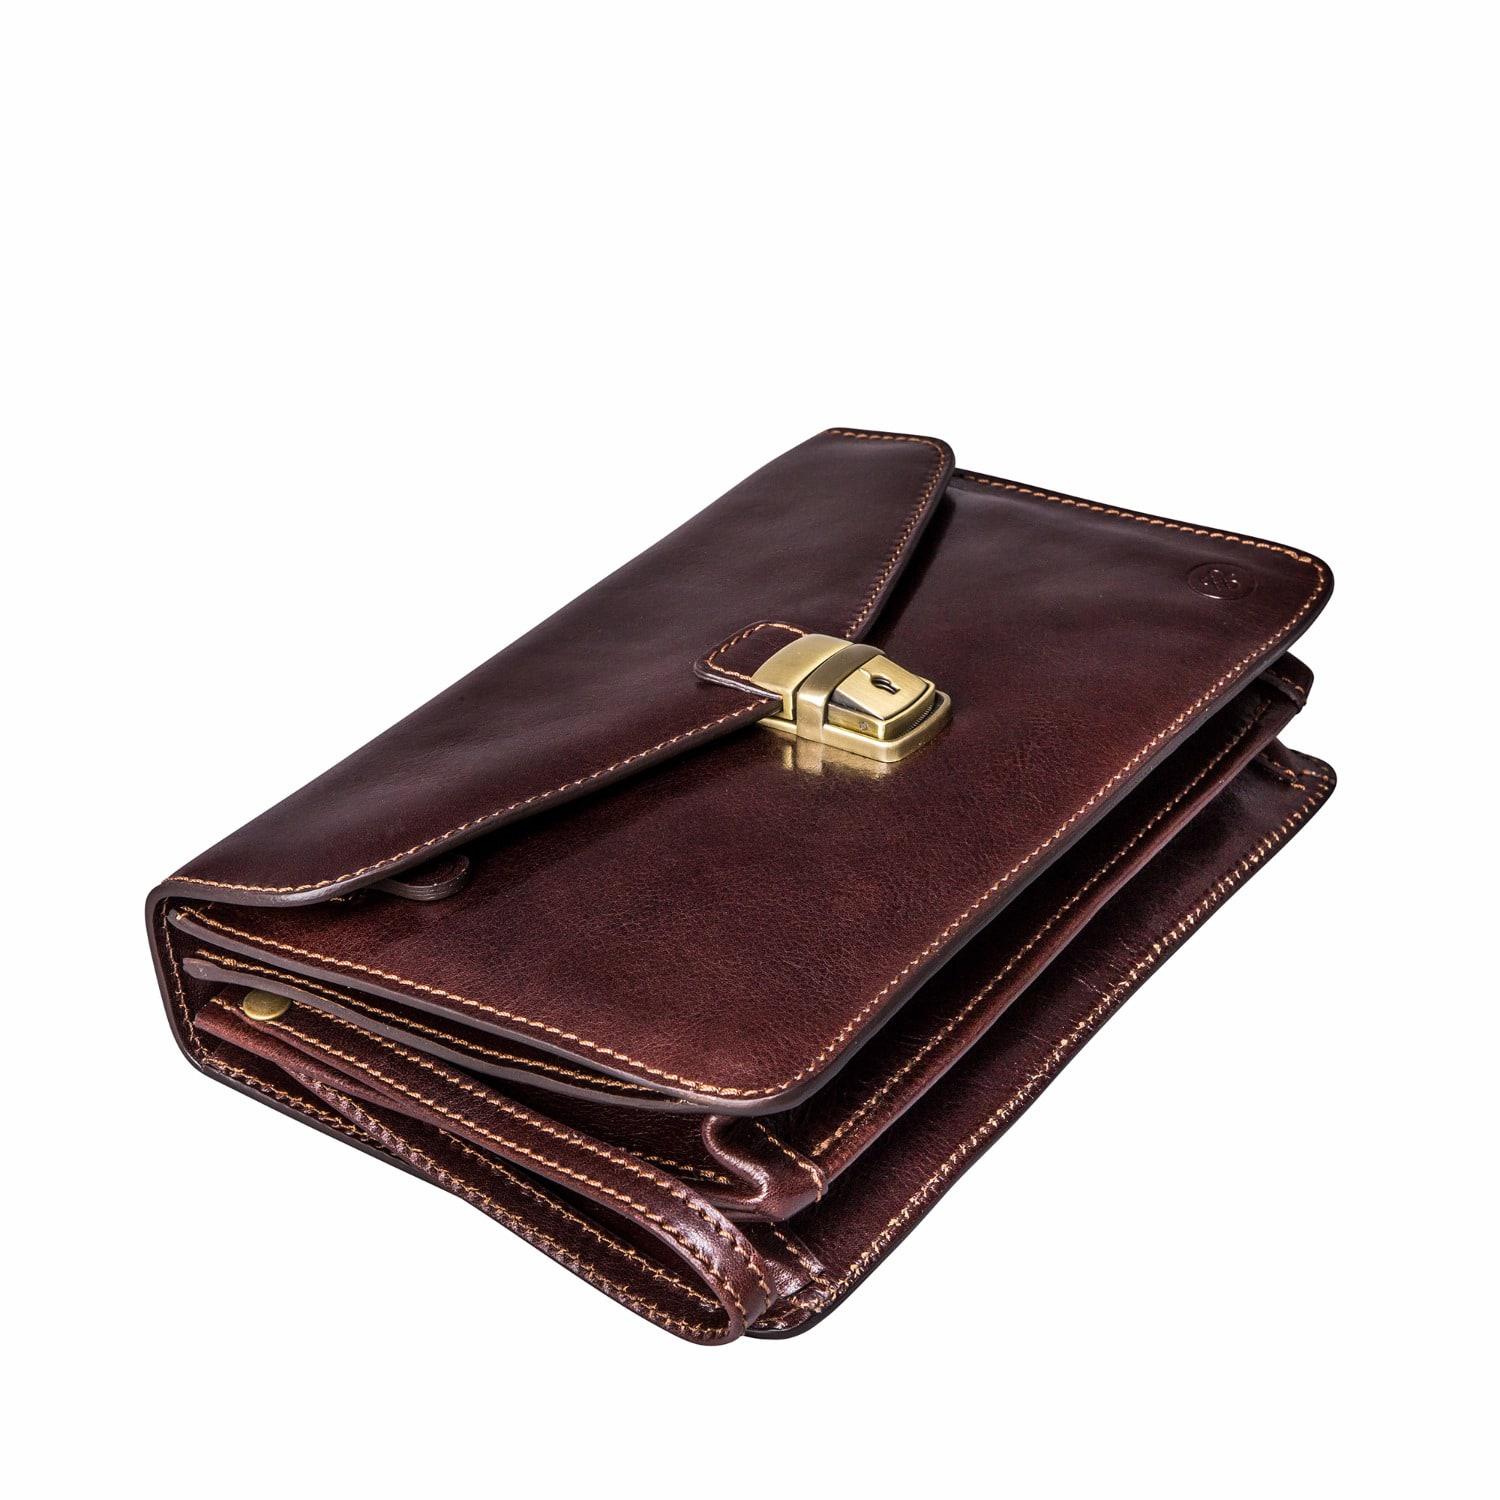 Maxwell Scott Bags Men's Italian Leather Wallet with Coin Pocket